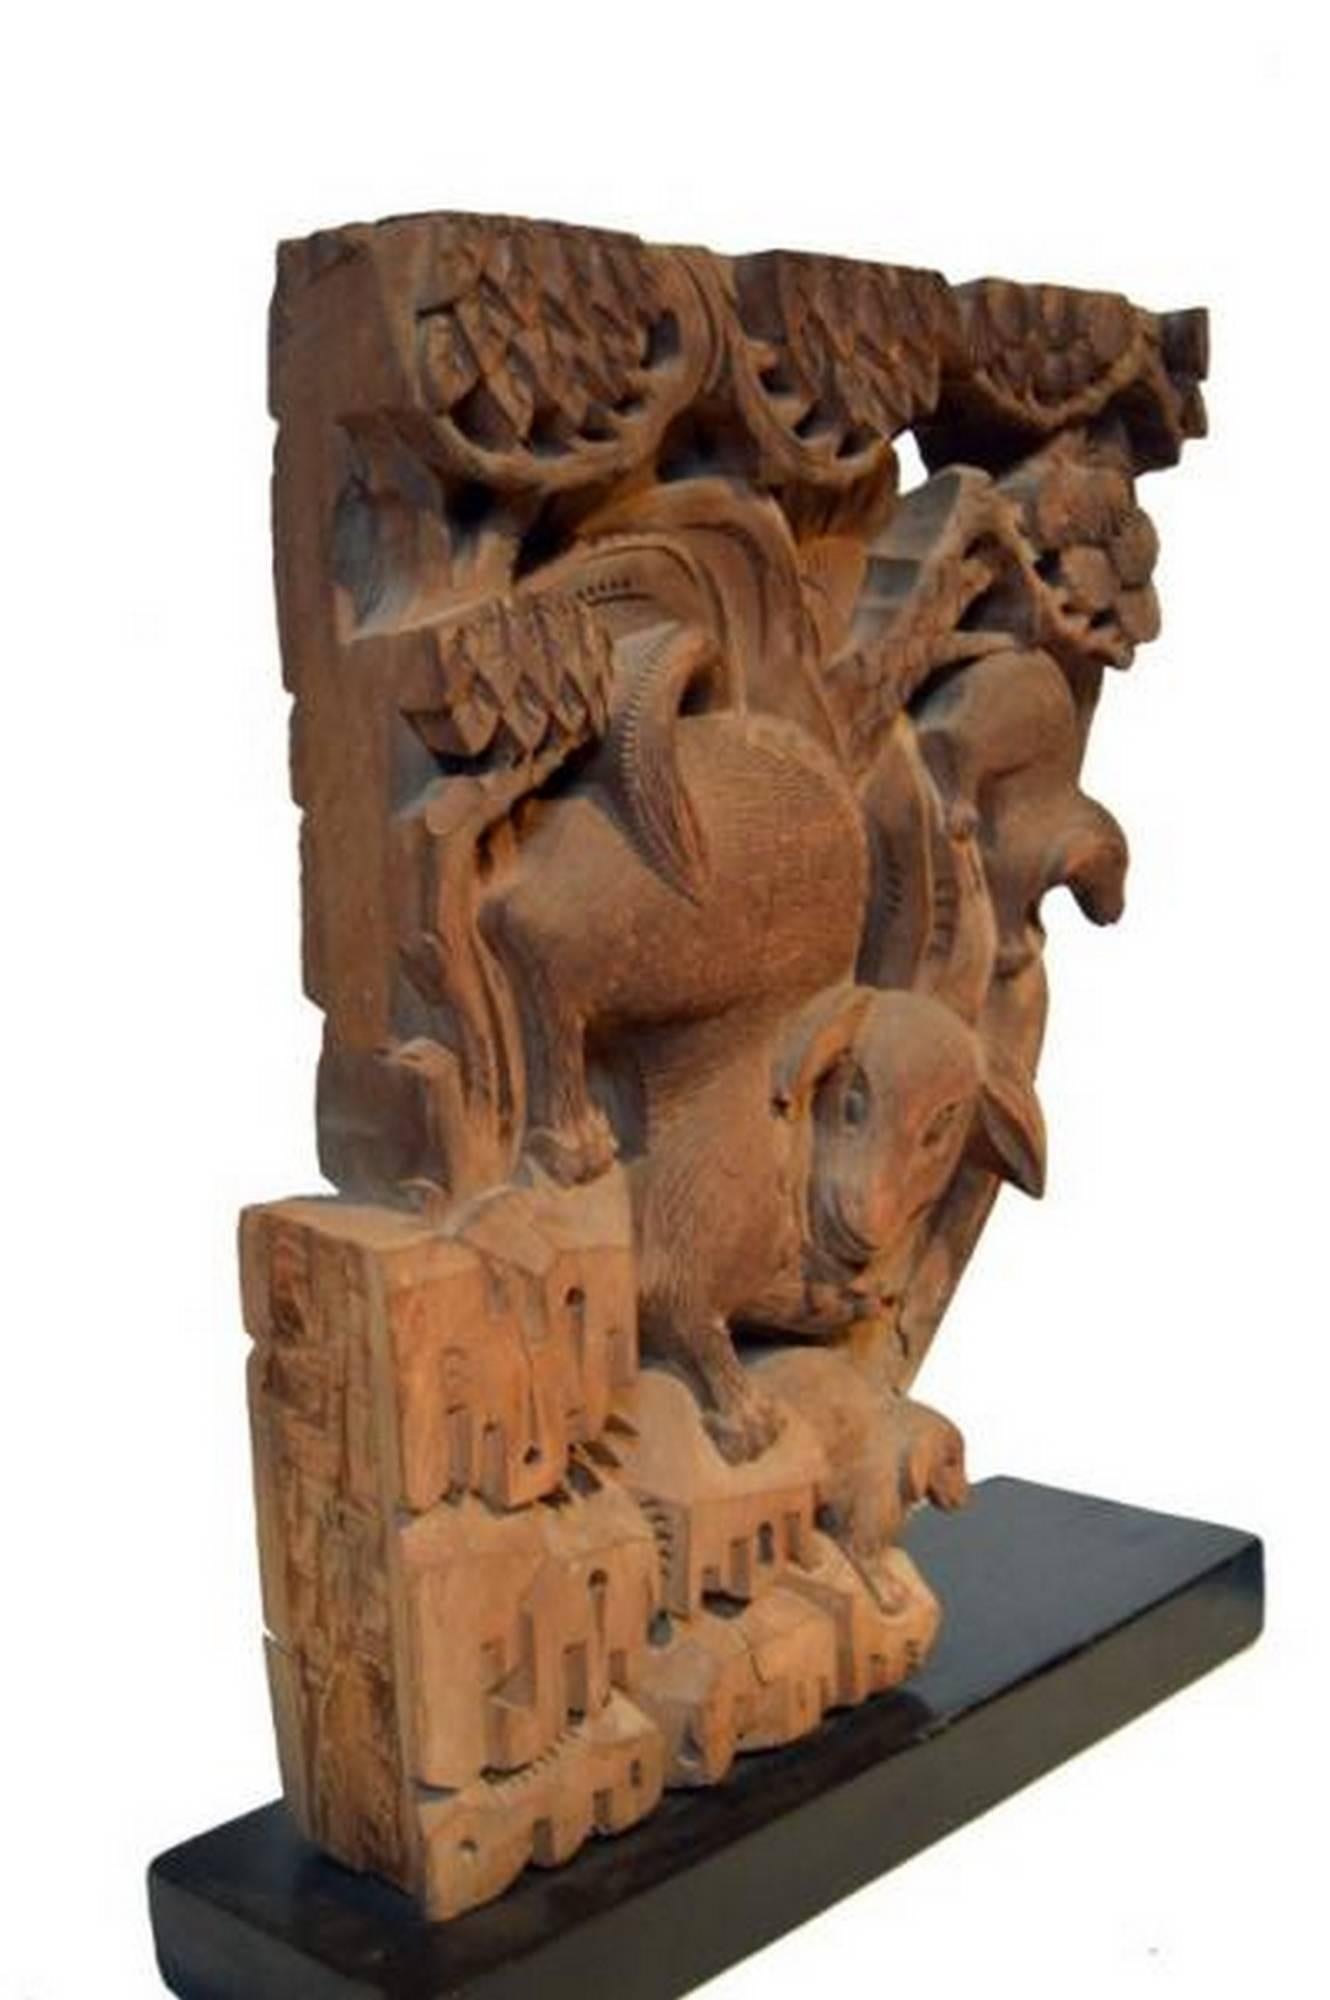 A pair of Chinese 18th century hand-carved wooden temple corbels. Each corbel features detailed animals, shells, and other adornments among openwork foliage patterns. The scenes with these animals take place on stylized rocks and under a tree. The